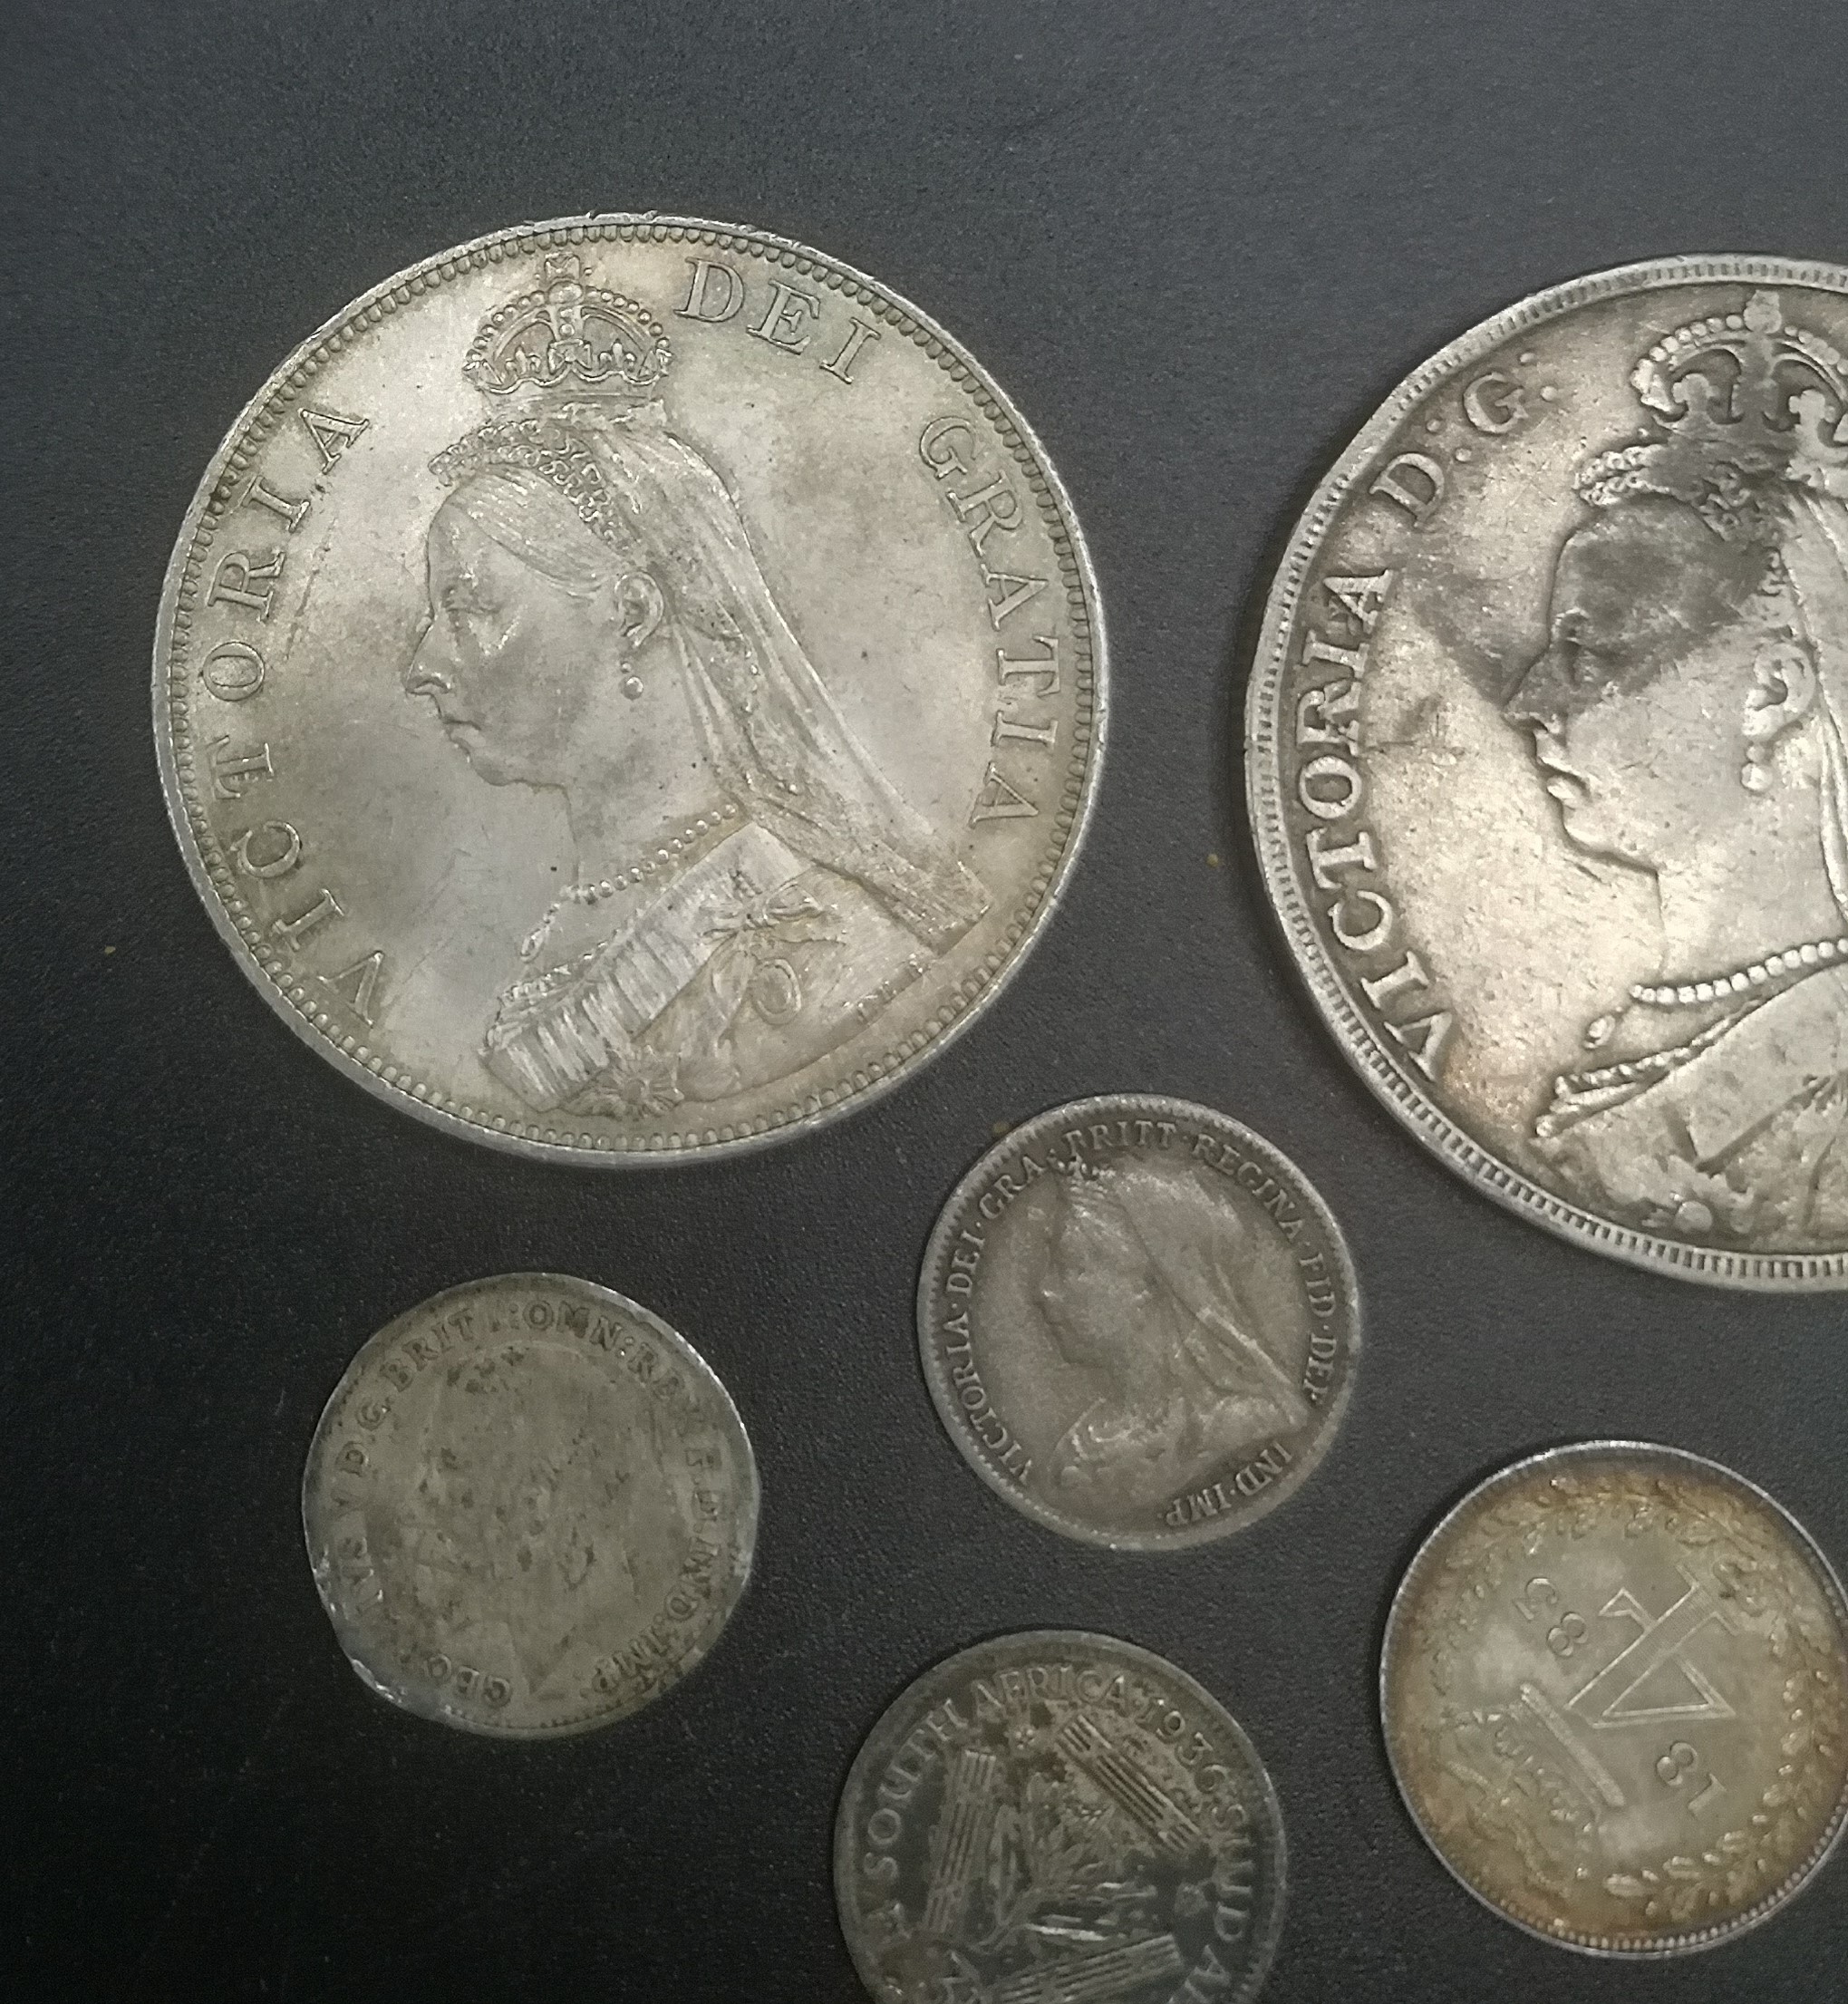 Queen Victoria crown 1890, double florin 1889, and 4 other silver coins - Image 7 of 8